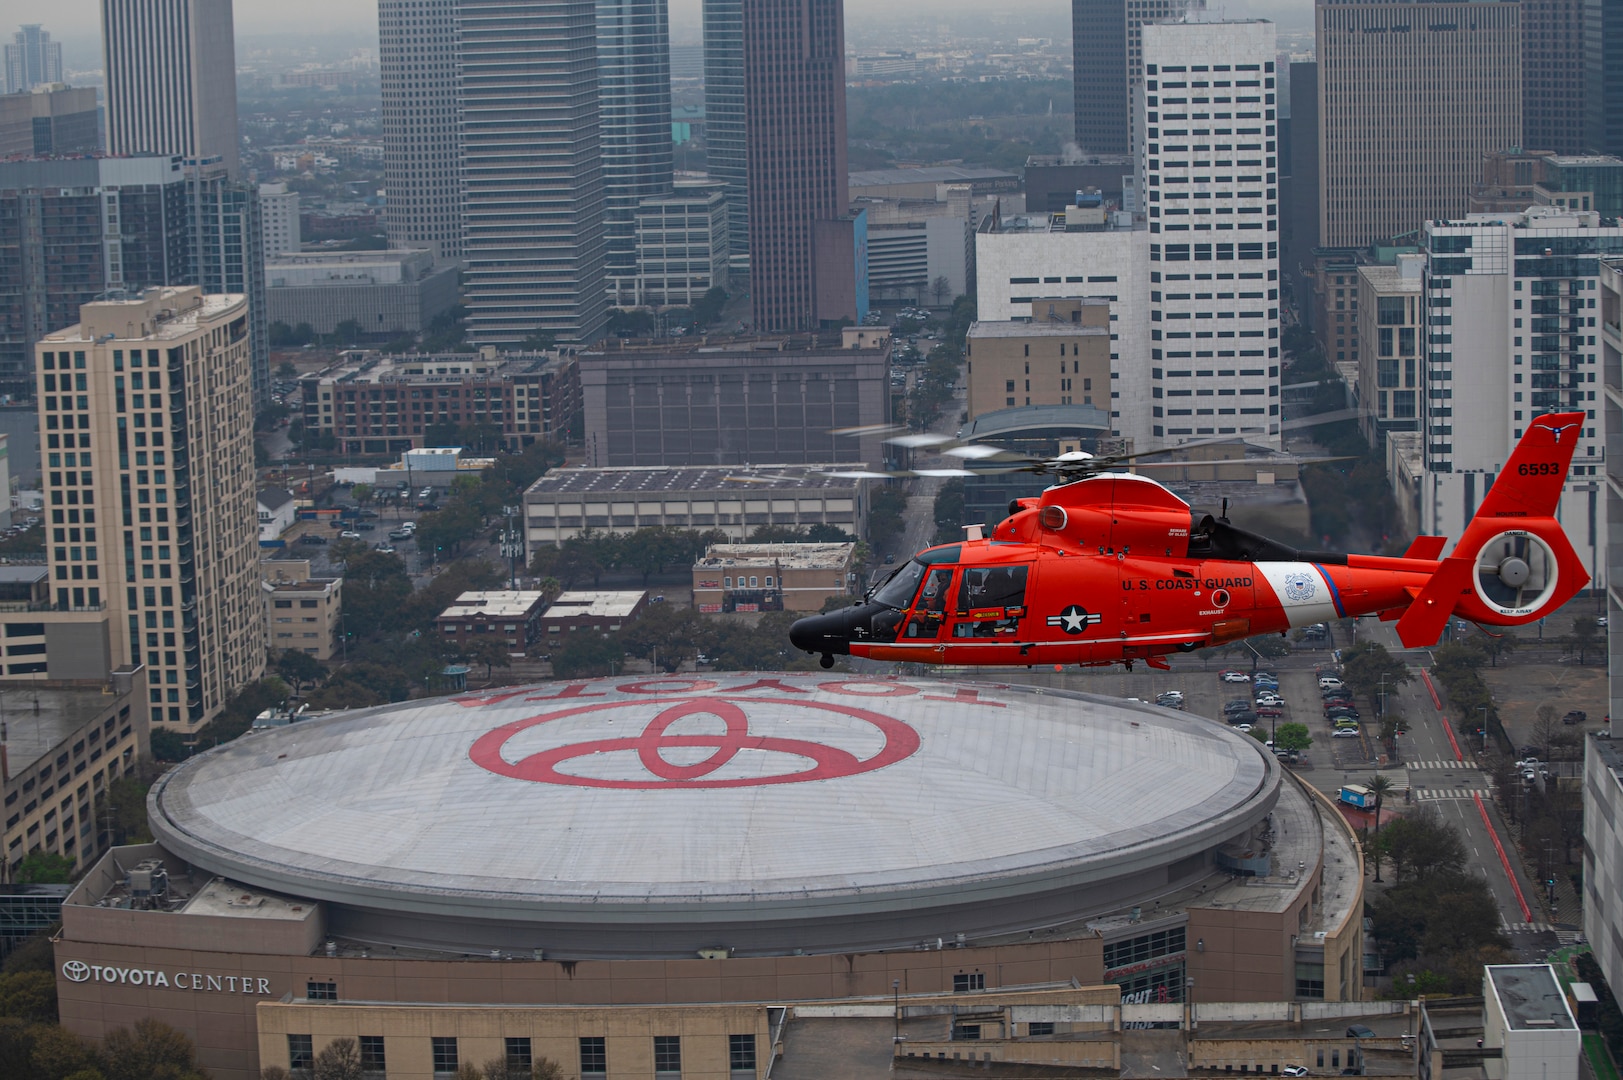 Coast Guard Air Station Houston performs an area of responsibility formation flight over the Toyota Center in Houston, Texas, March 11, 2022. The air station regularly conducts AOR runs to keep crews familiar with the area. (U.S. Coast Guard photo by Petty Officer 3rd Class Alejandro Rivera)